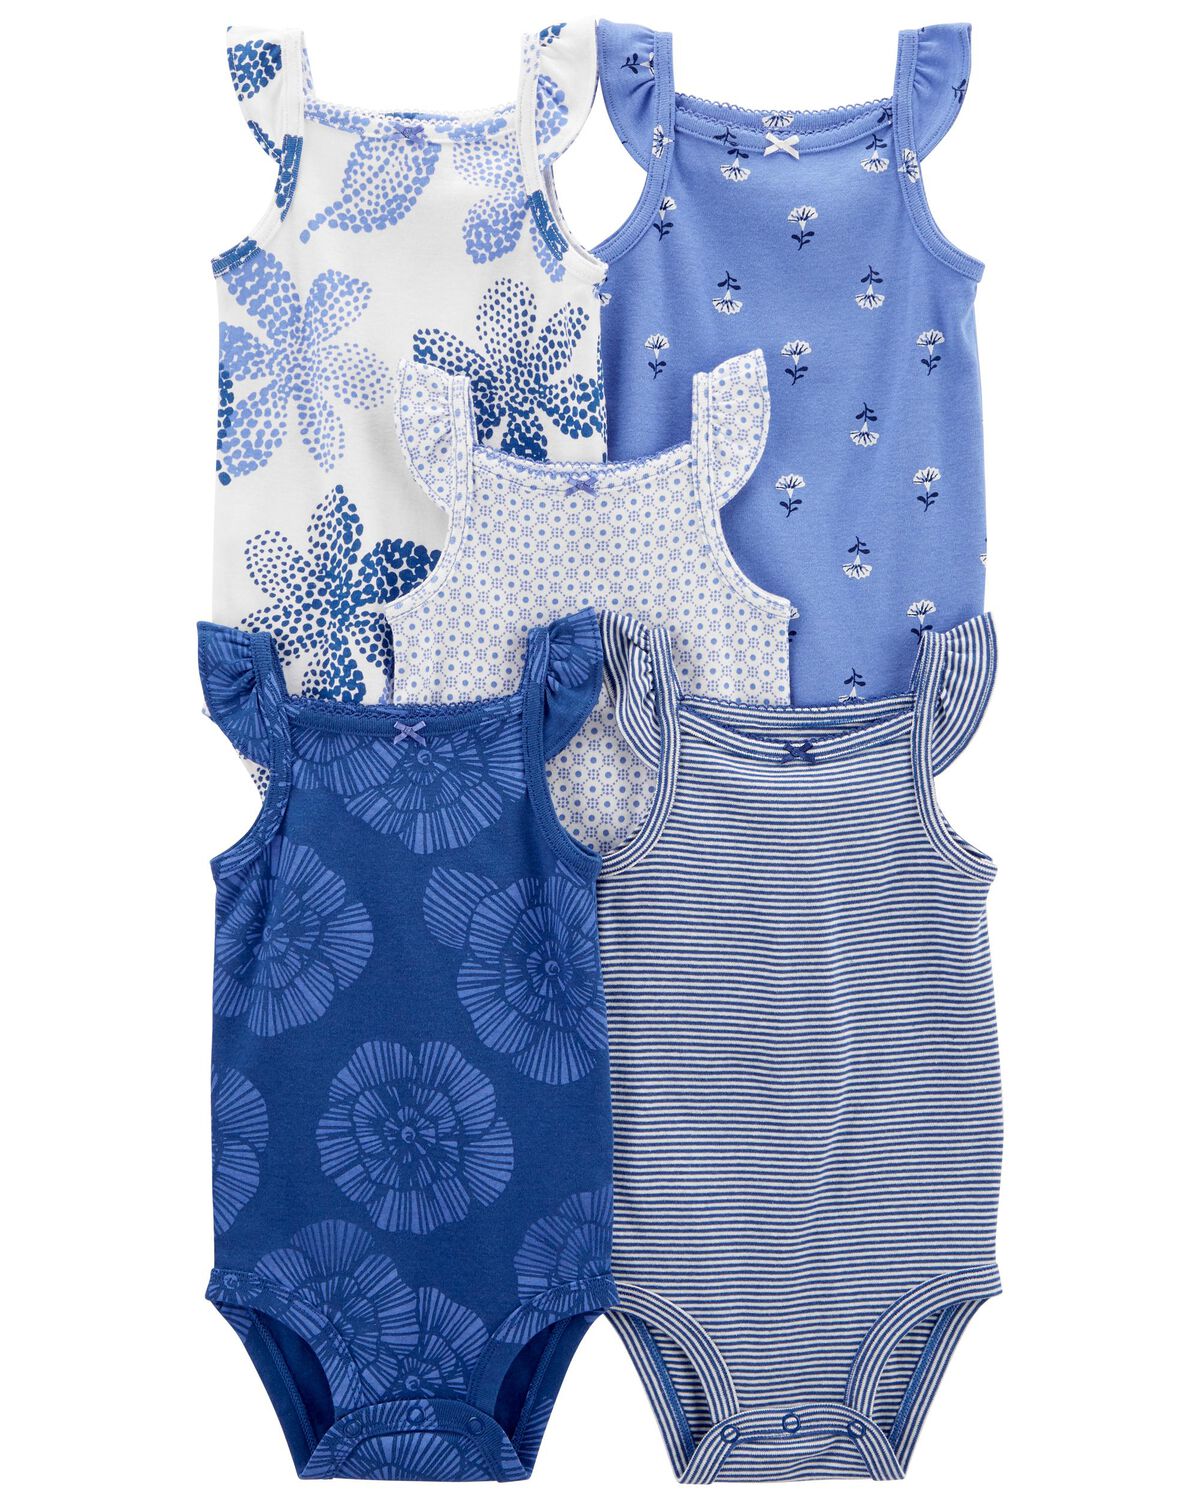 Blue/White Baby 5-Pack Tank Bodysuits | carters.com